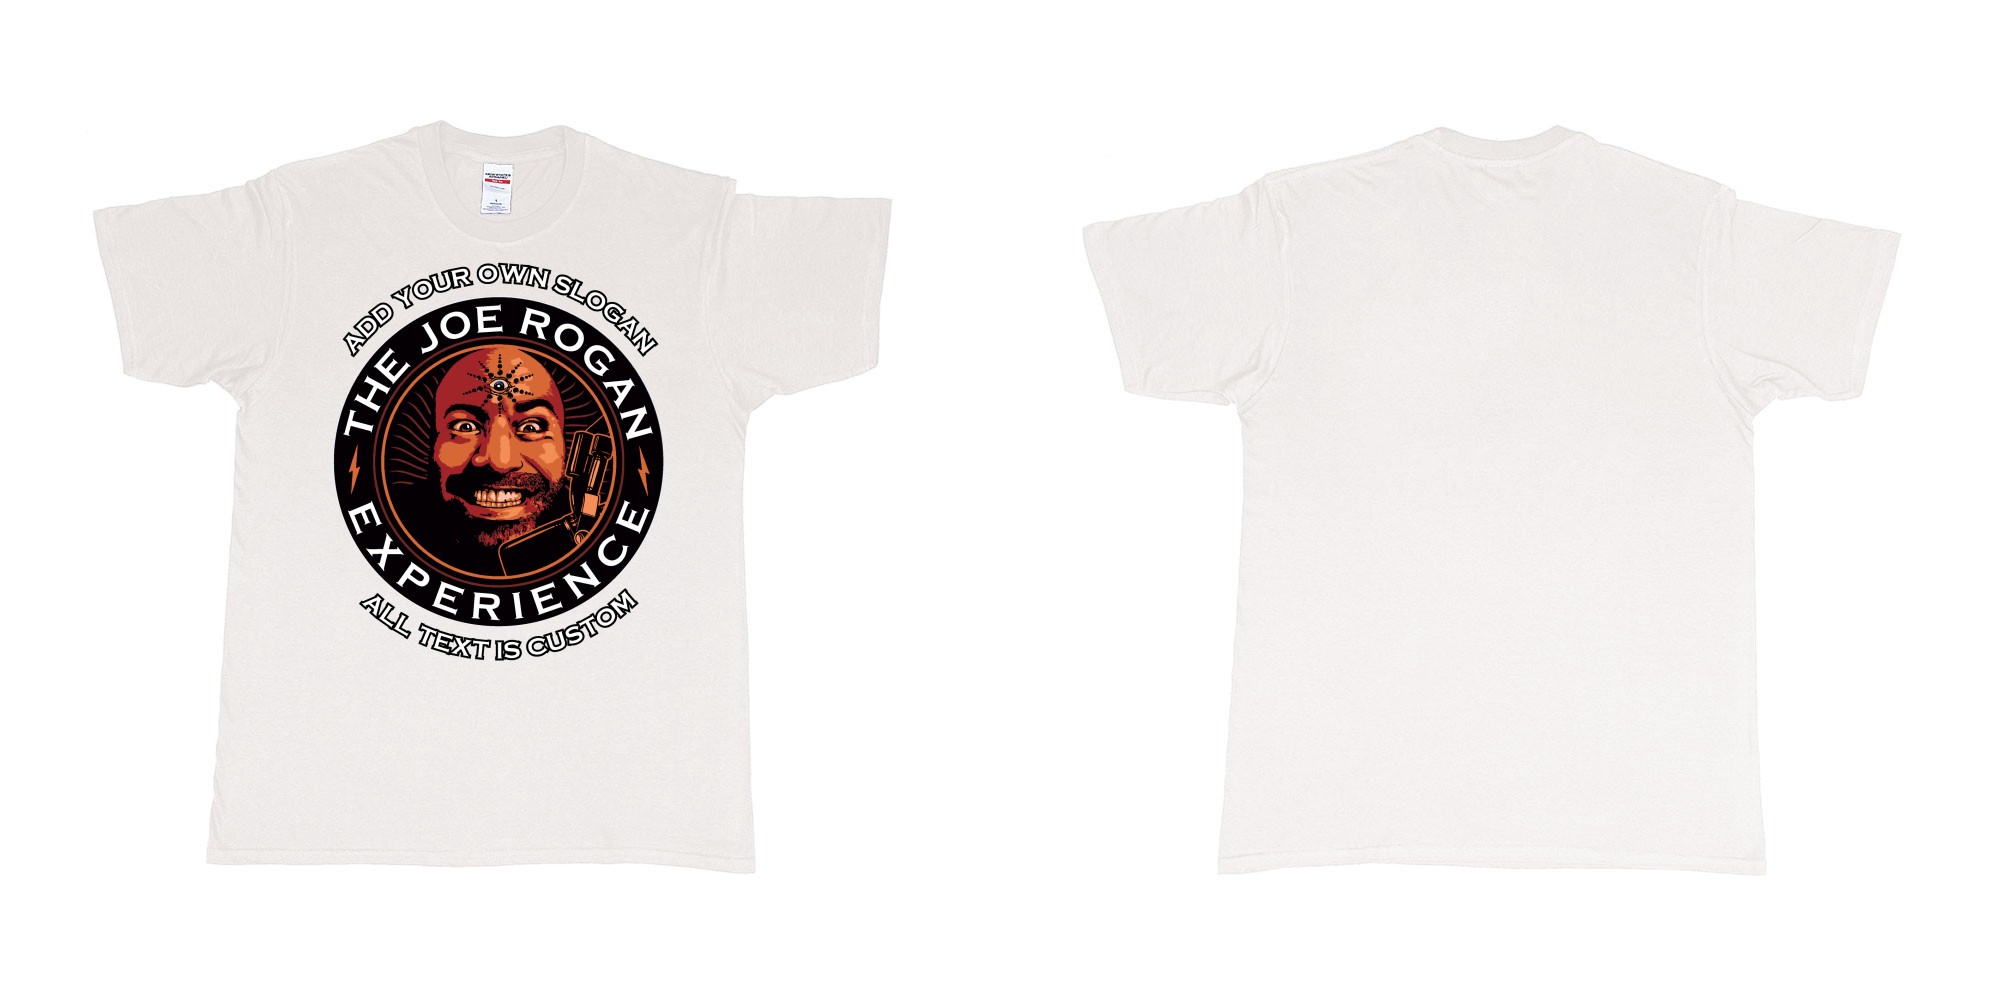 Custom tshirt design the joe rogan experience custom tshirt in fabric color white choice your own text made in Bali by The Pirate Way